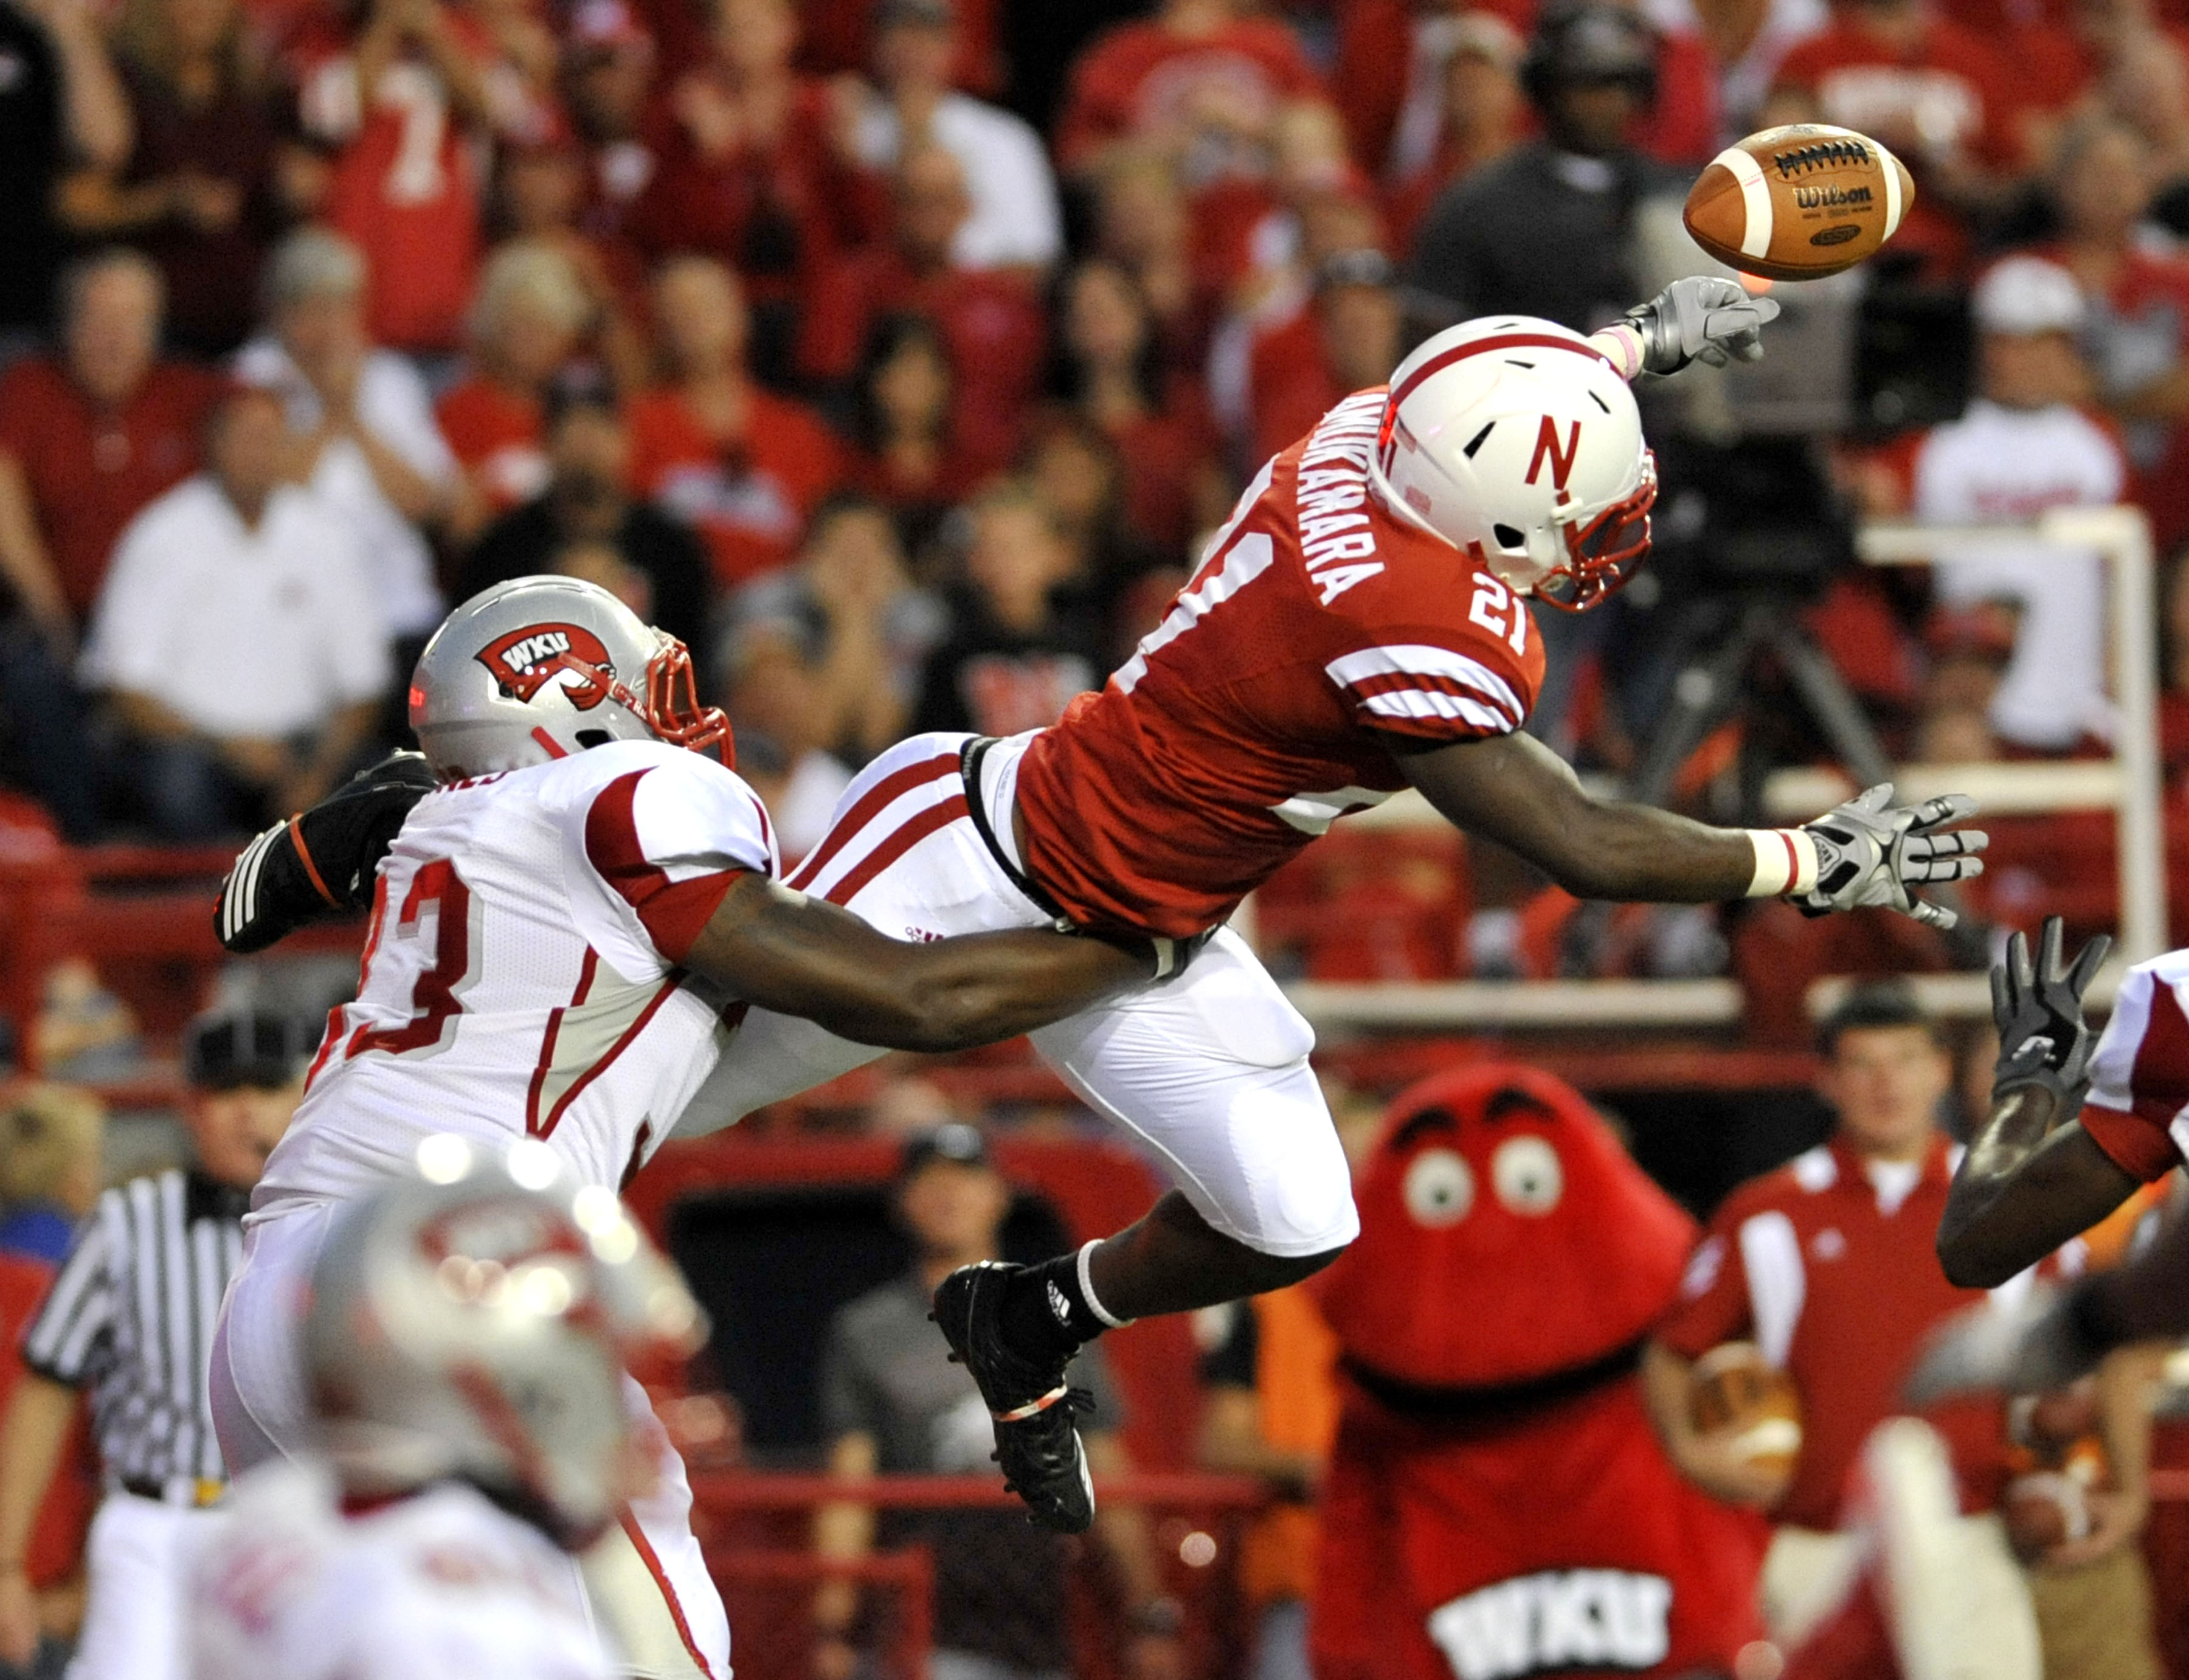 LINCOLN, NE - SEPTEMBER 04:  Prince Amukamara #21 of the Nebraska Cornhuskers knocks down a pass intended for Tristan Jones #33 of the Western Kentucky Hilltoppers during second half action of their game against at Memorial Stadium on September 4, 2010 in